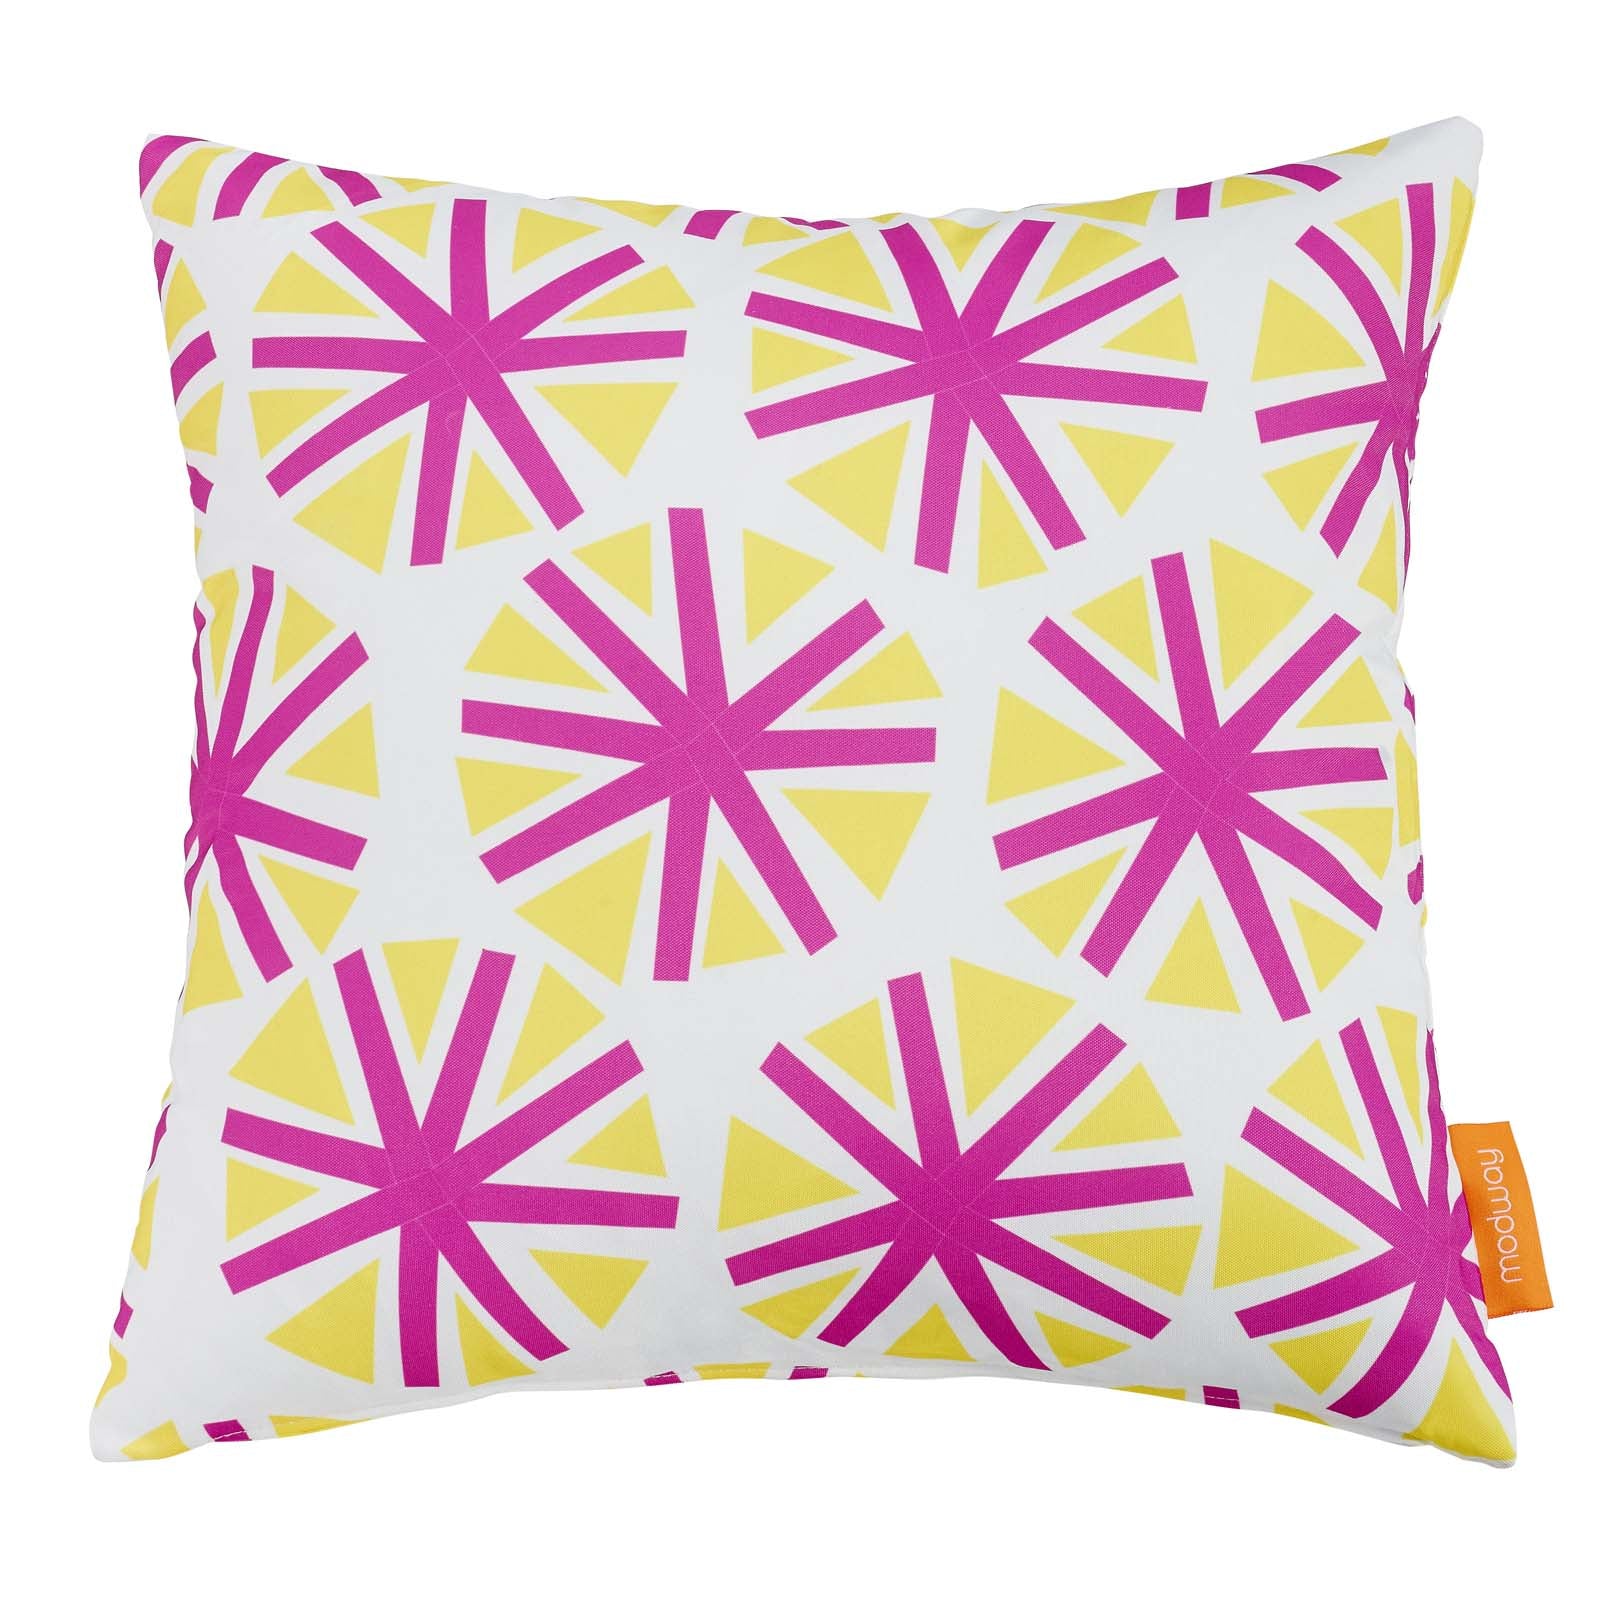 Modway Outdoor Pillows & Cushions - Modway Two Piece Outdoor Patio Pillow Set Starburst